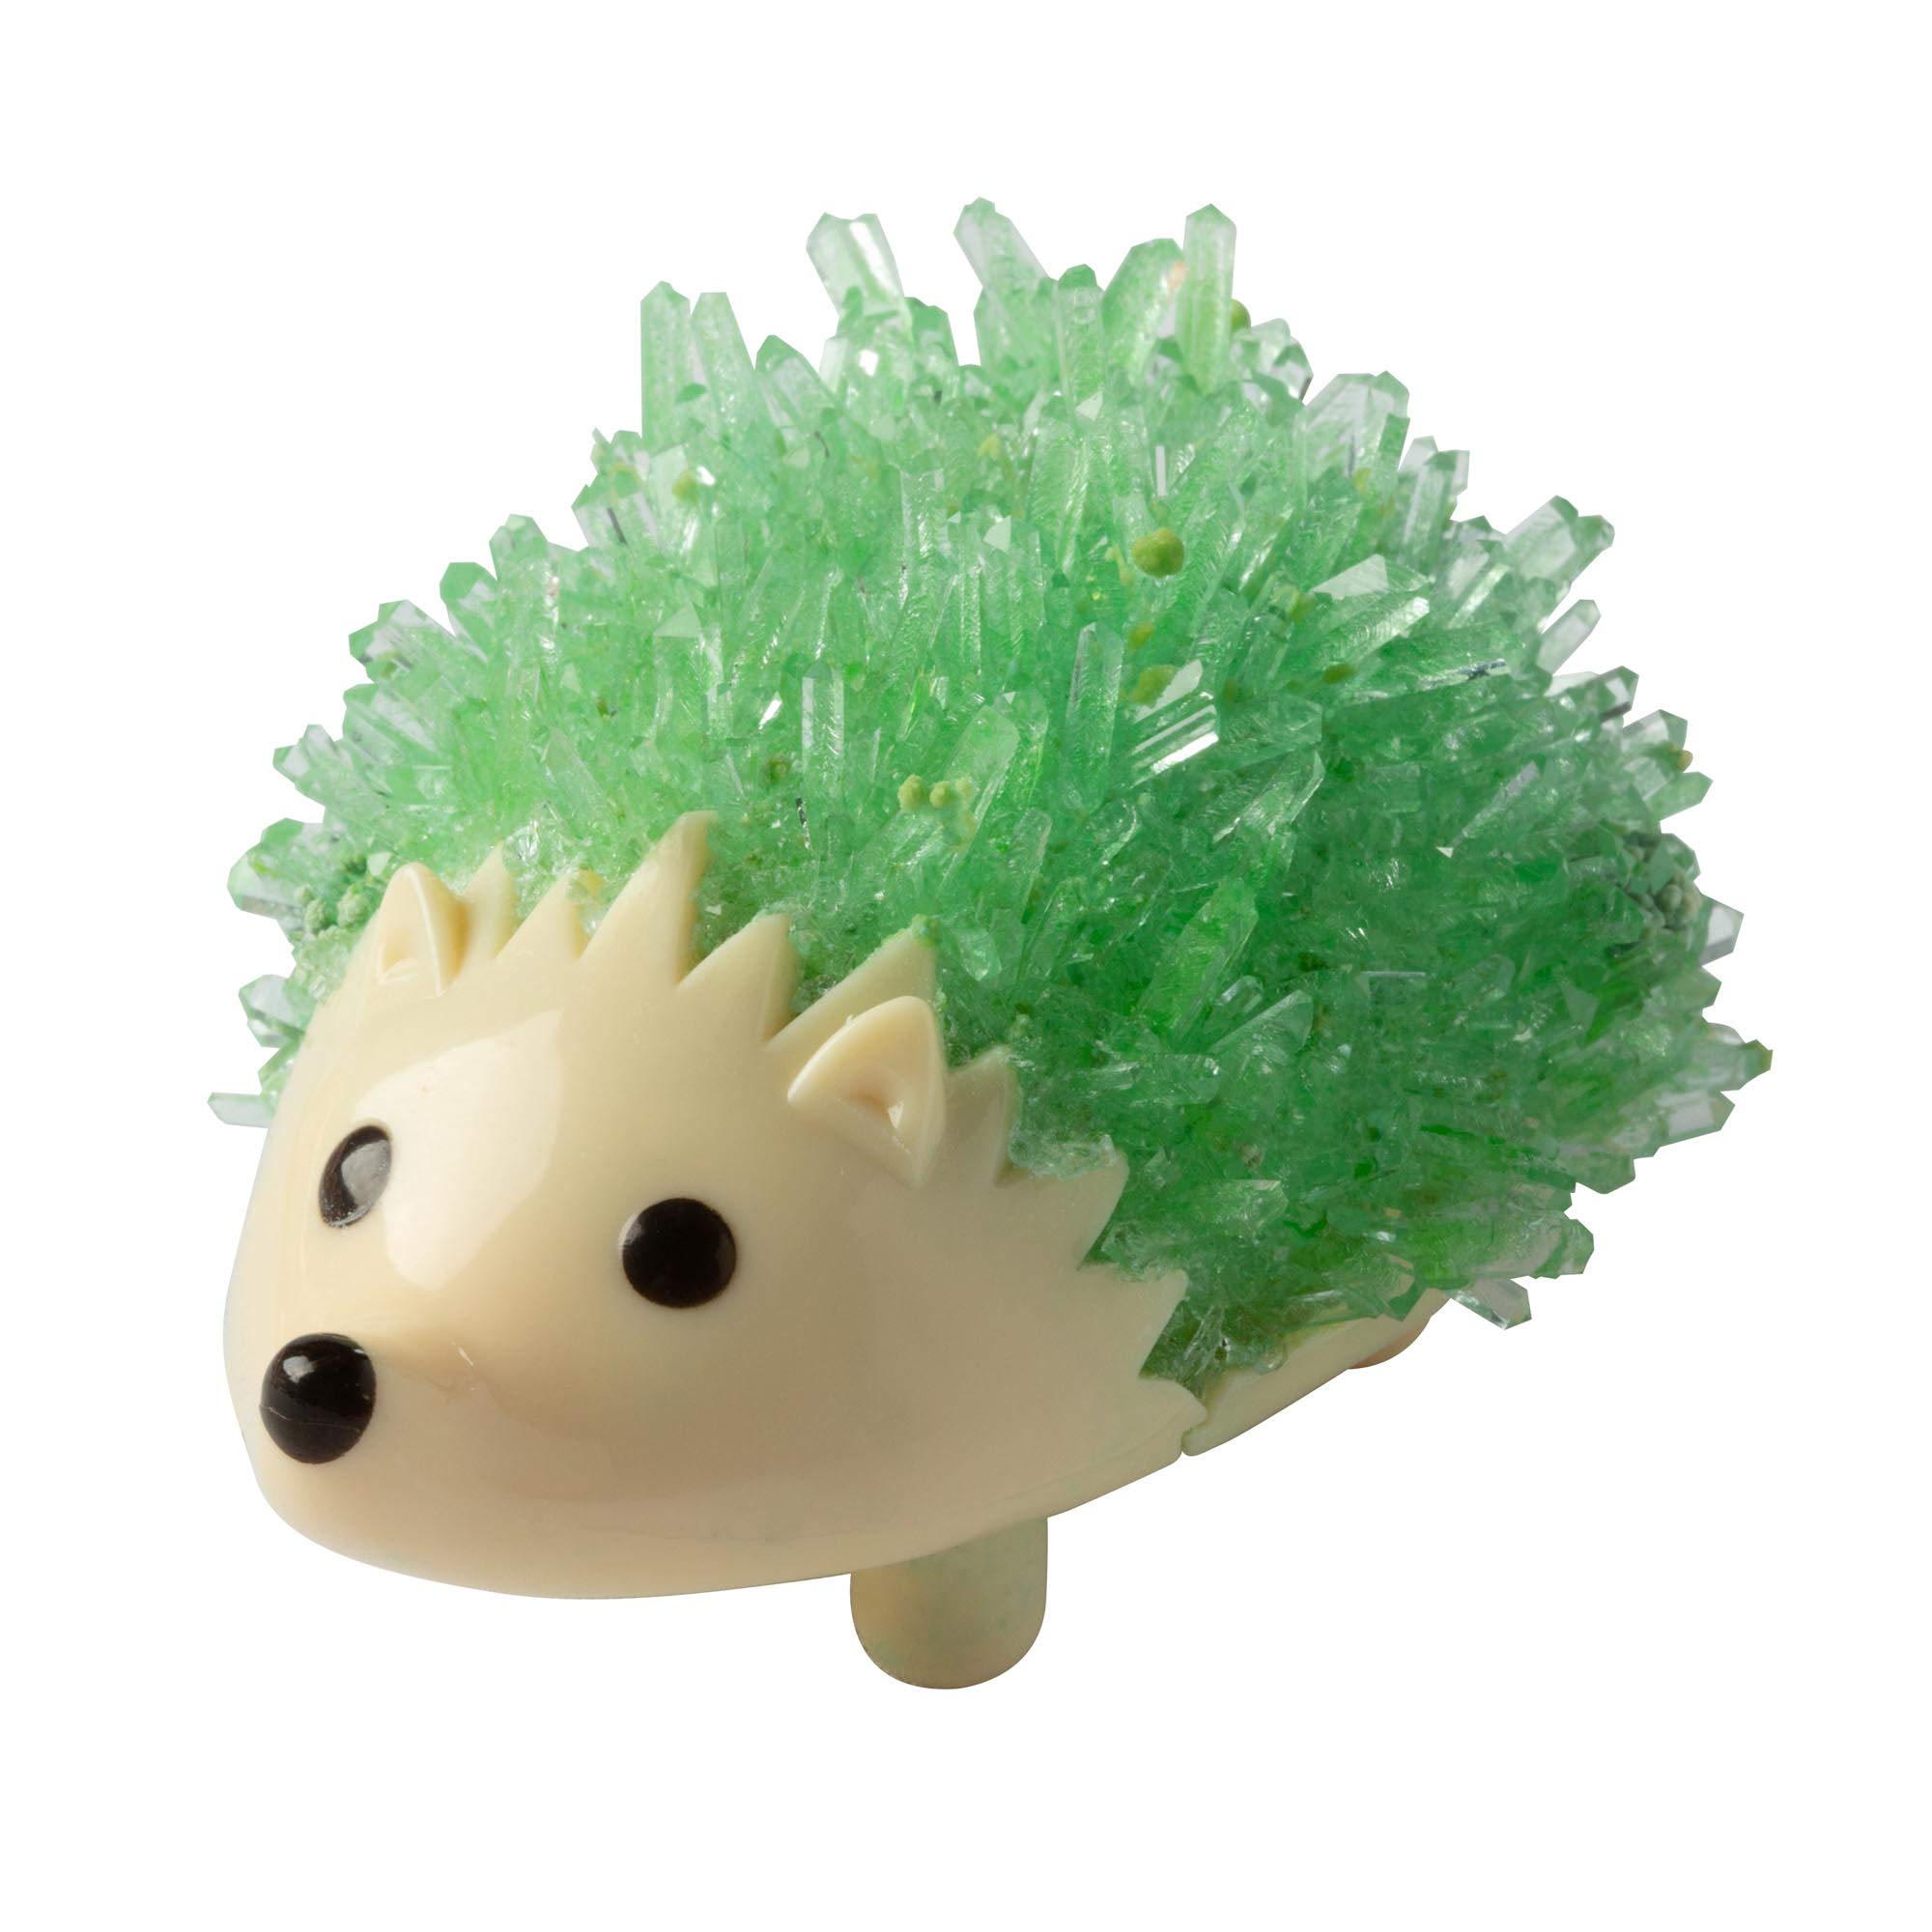 Book Cover Fat Brain Toys Crystal Growing Hedgehog - Green Maker & DIY Kits for Ages 10 to 12